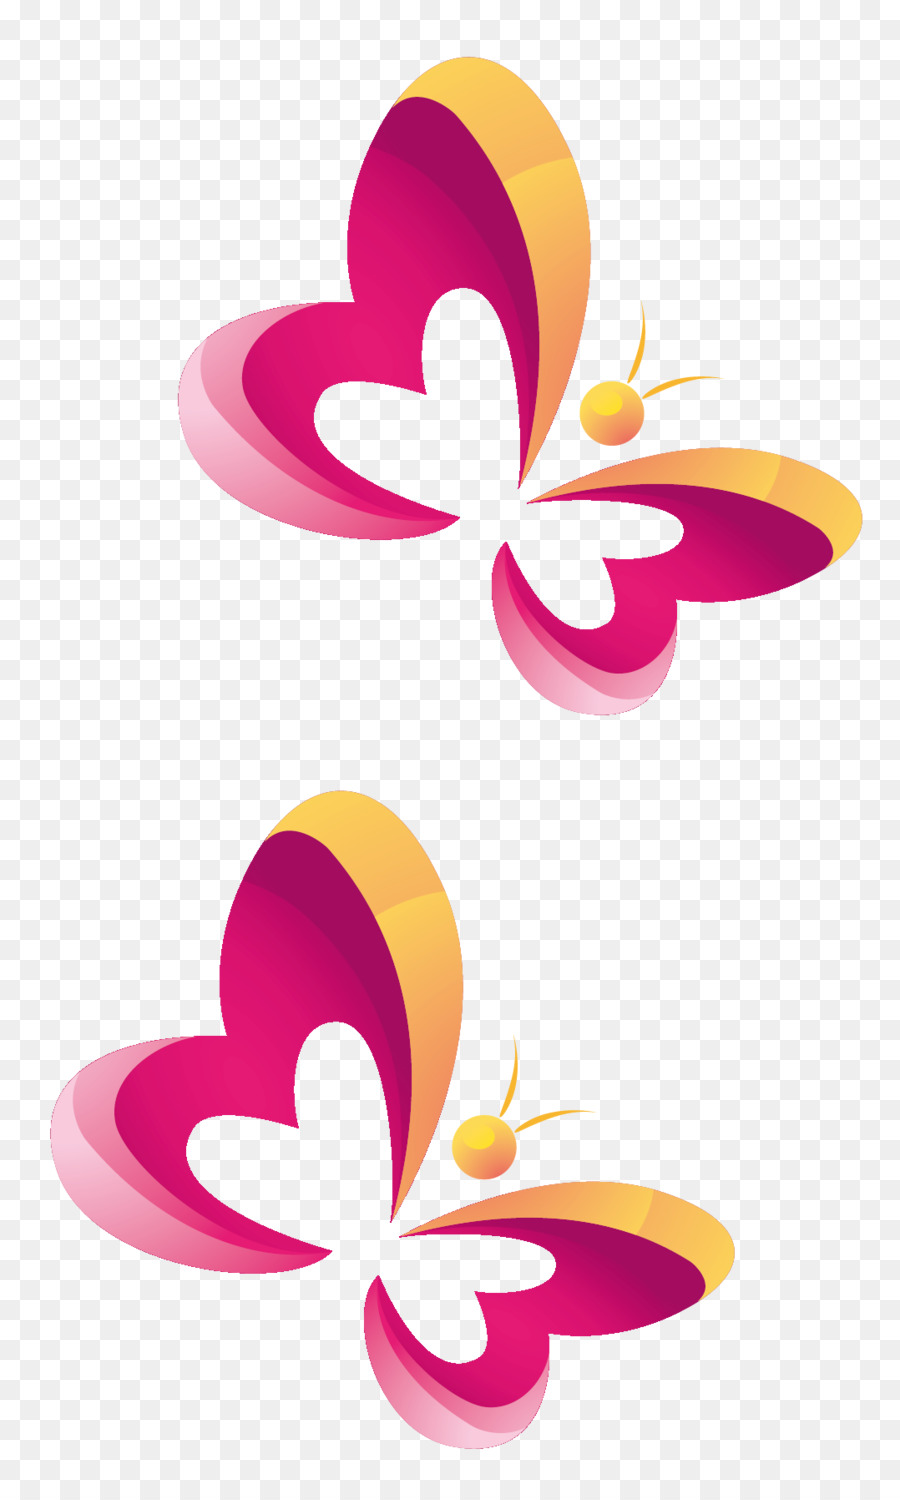 Butterfly Icon - Pink butterfly simple pen png download - 1078*1784 - Free Transparent Butterfly png Download.